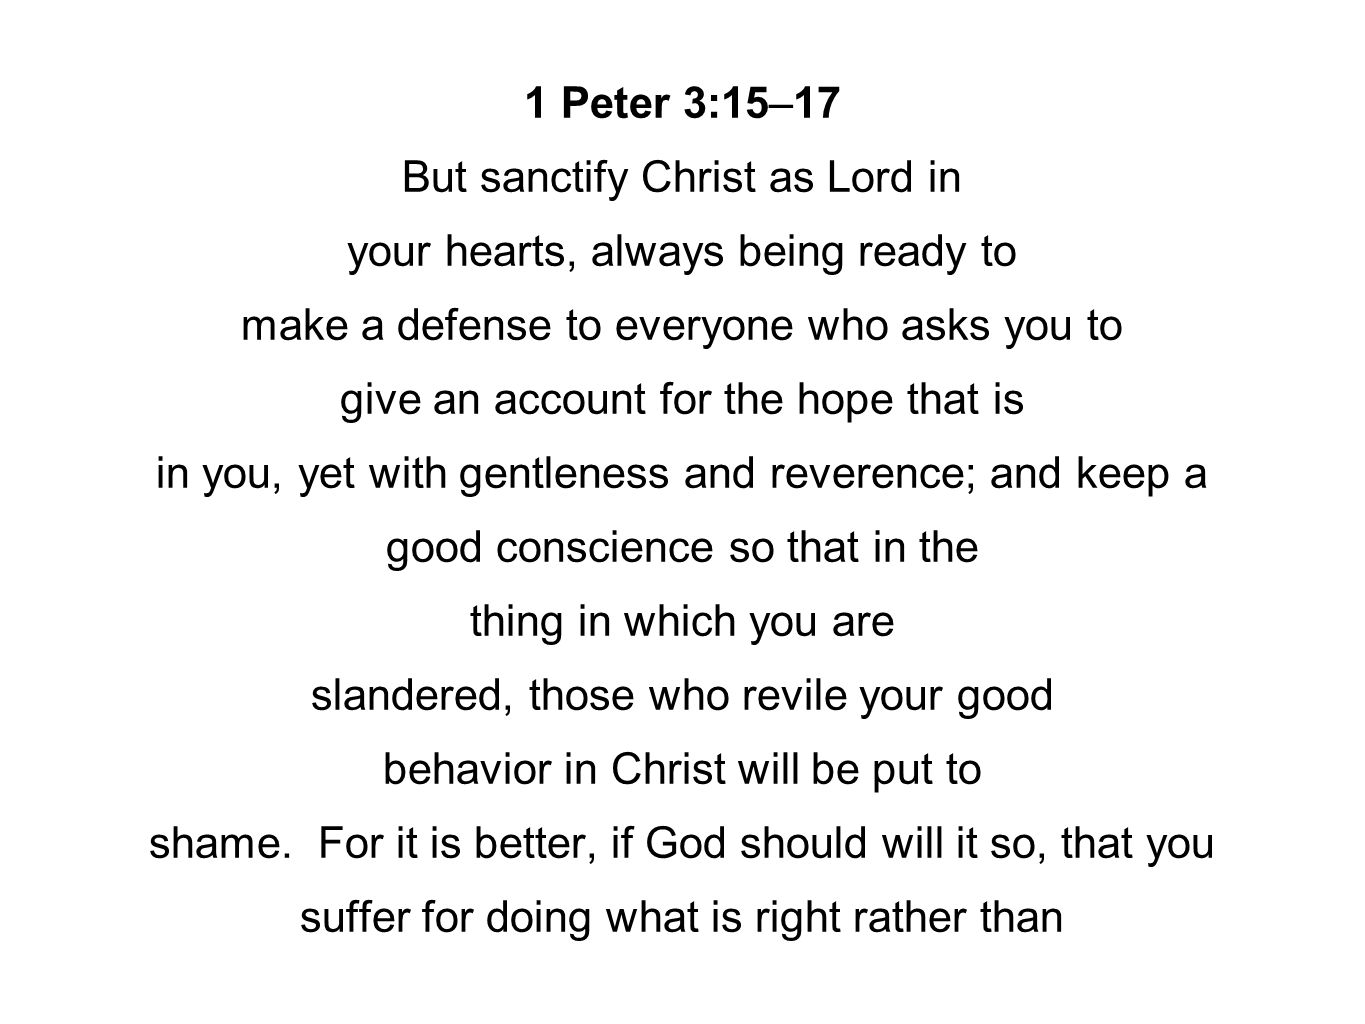 1 Peter 3:15–17 But sanctify Christ as Lord in your hearts, always being ready to make a defense to everyone who asks you to give an account for the hope that is in you, yet with gentleness and reverence; and keep a good conscience so that in the thing in which you are slandered, those who revile your good behavior in Christ will be put to shame.